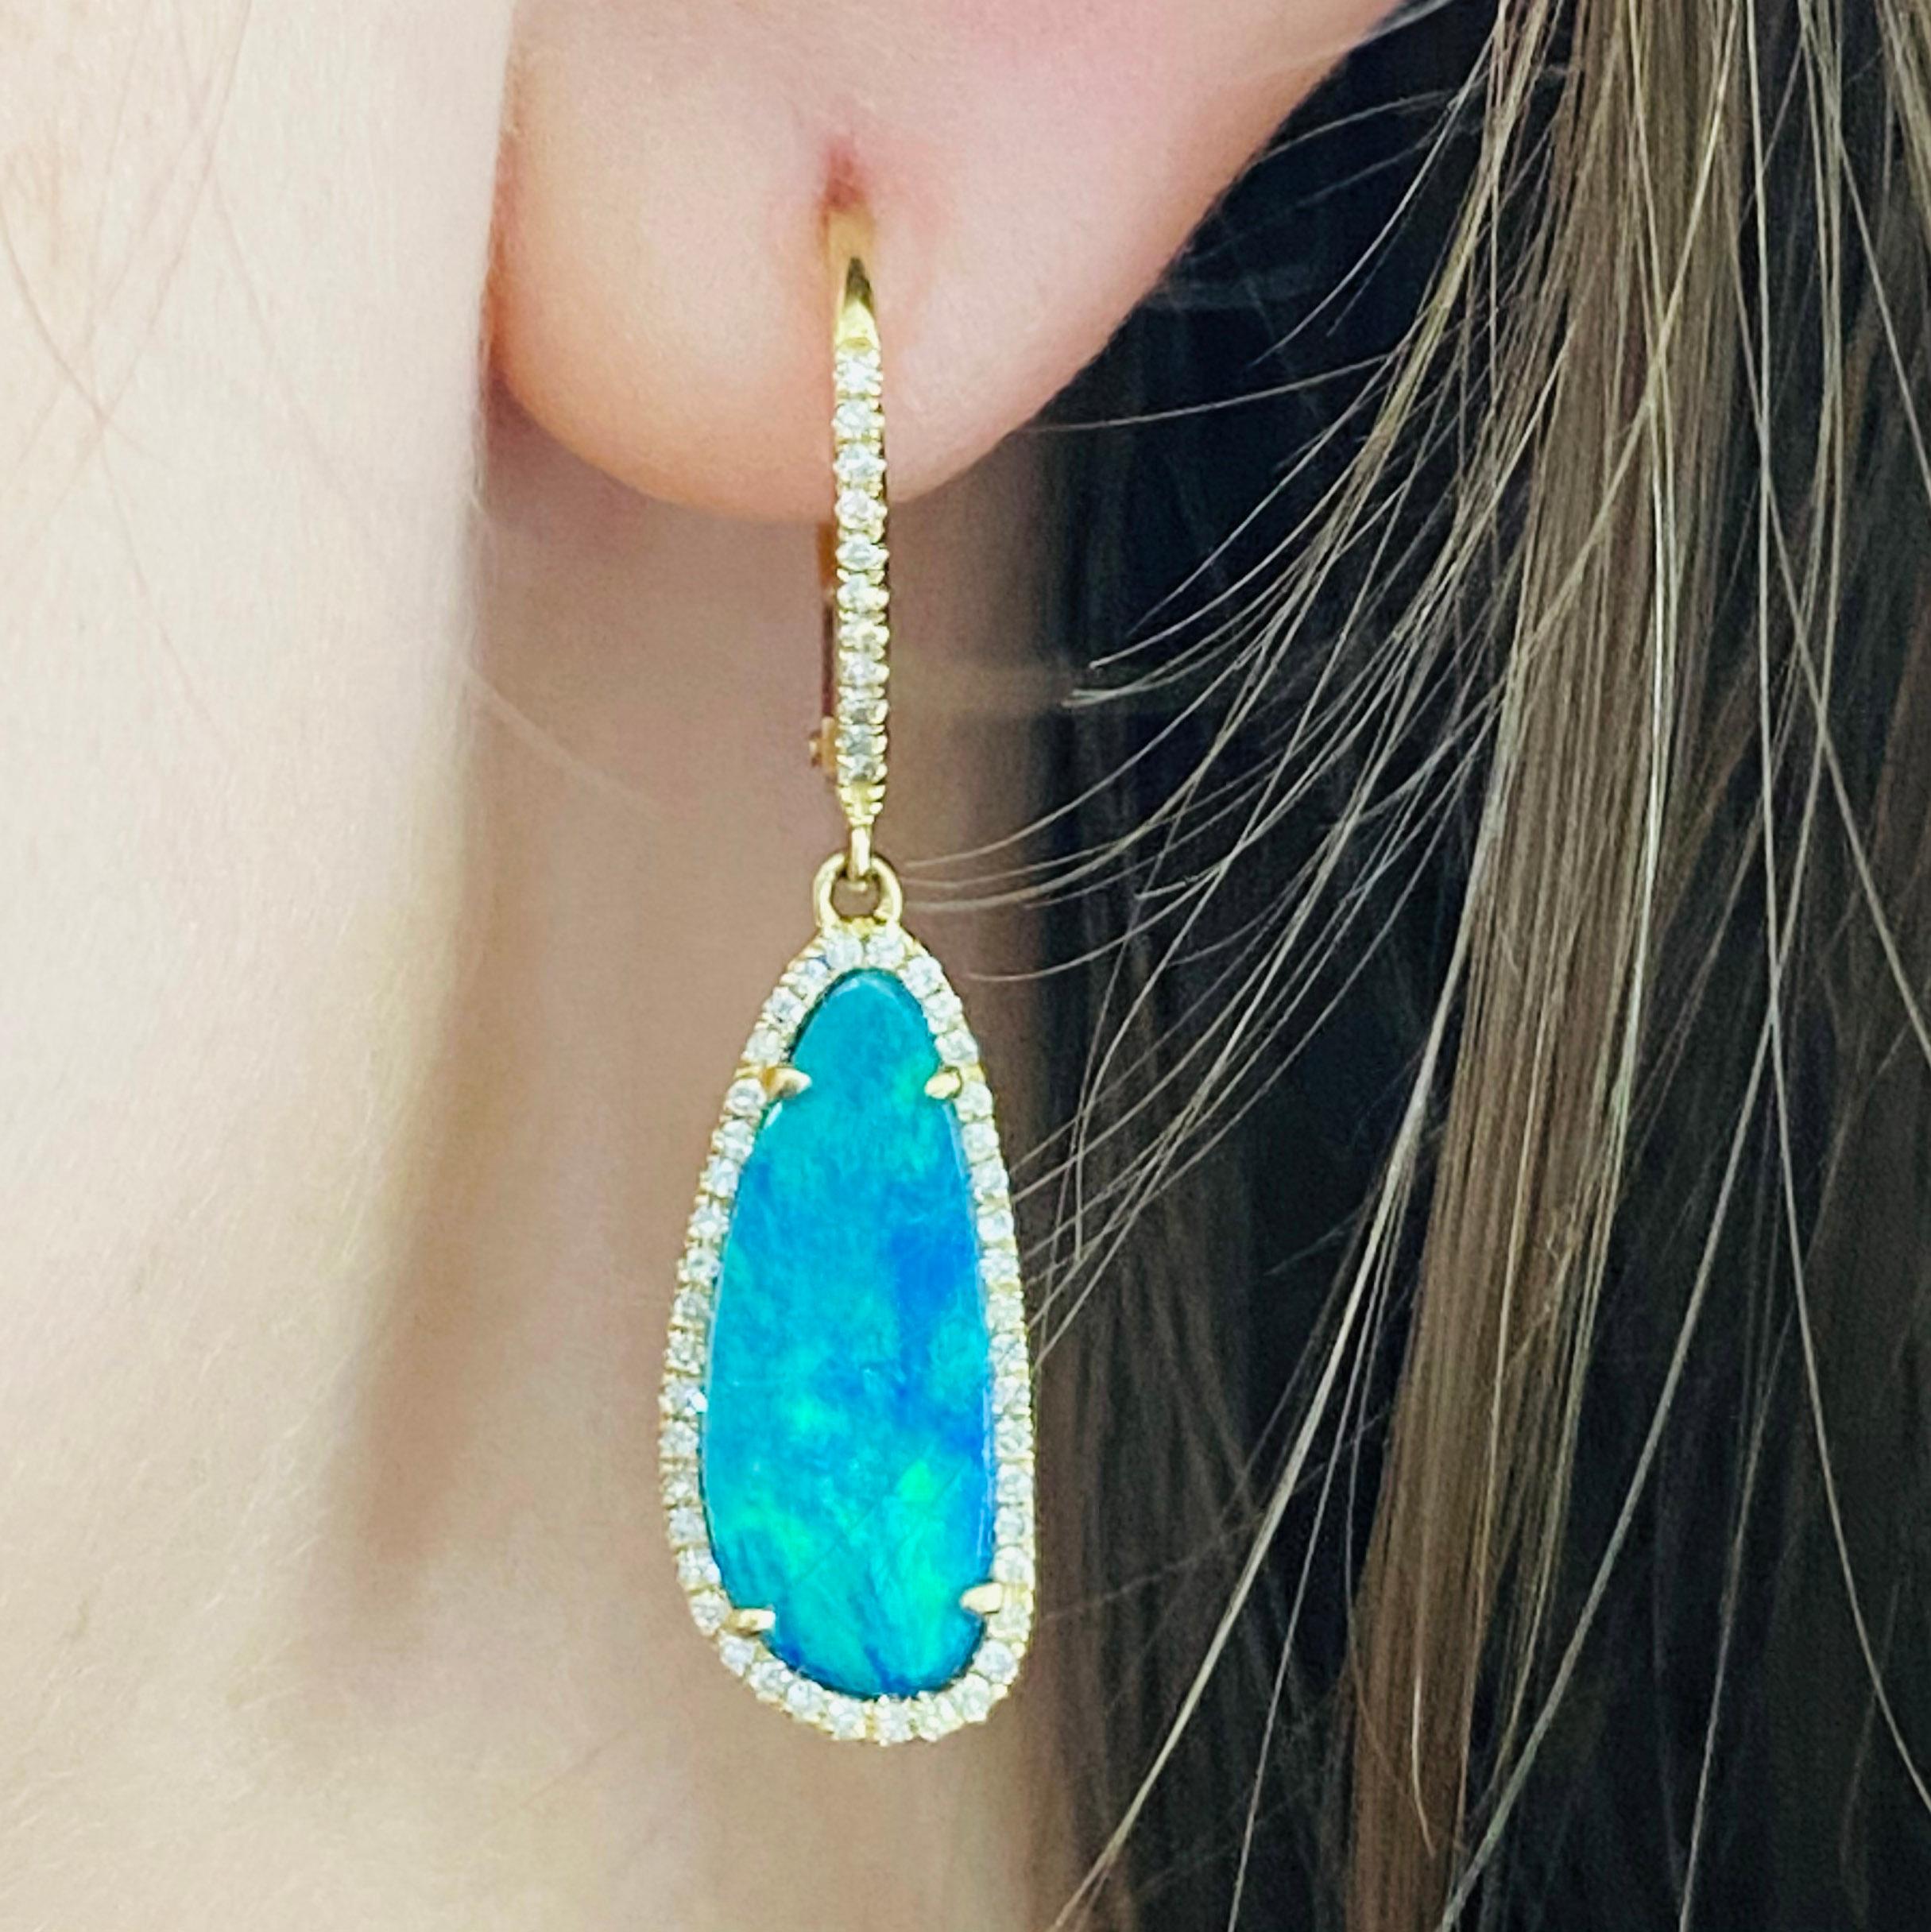 How stunning are these diamond and opal earring dangles? The genuine, natural opal and diamonds are set in a 14k yellow gold earring setting. The yellow gold compliments the natural blue and green flashes in the genuine opal gemstones. Opal is the